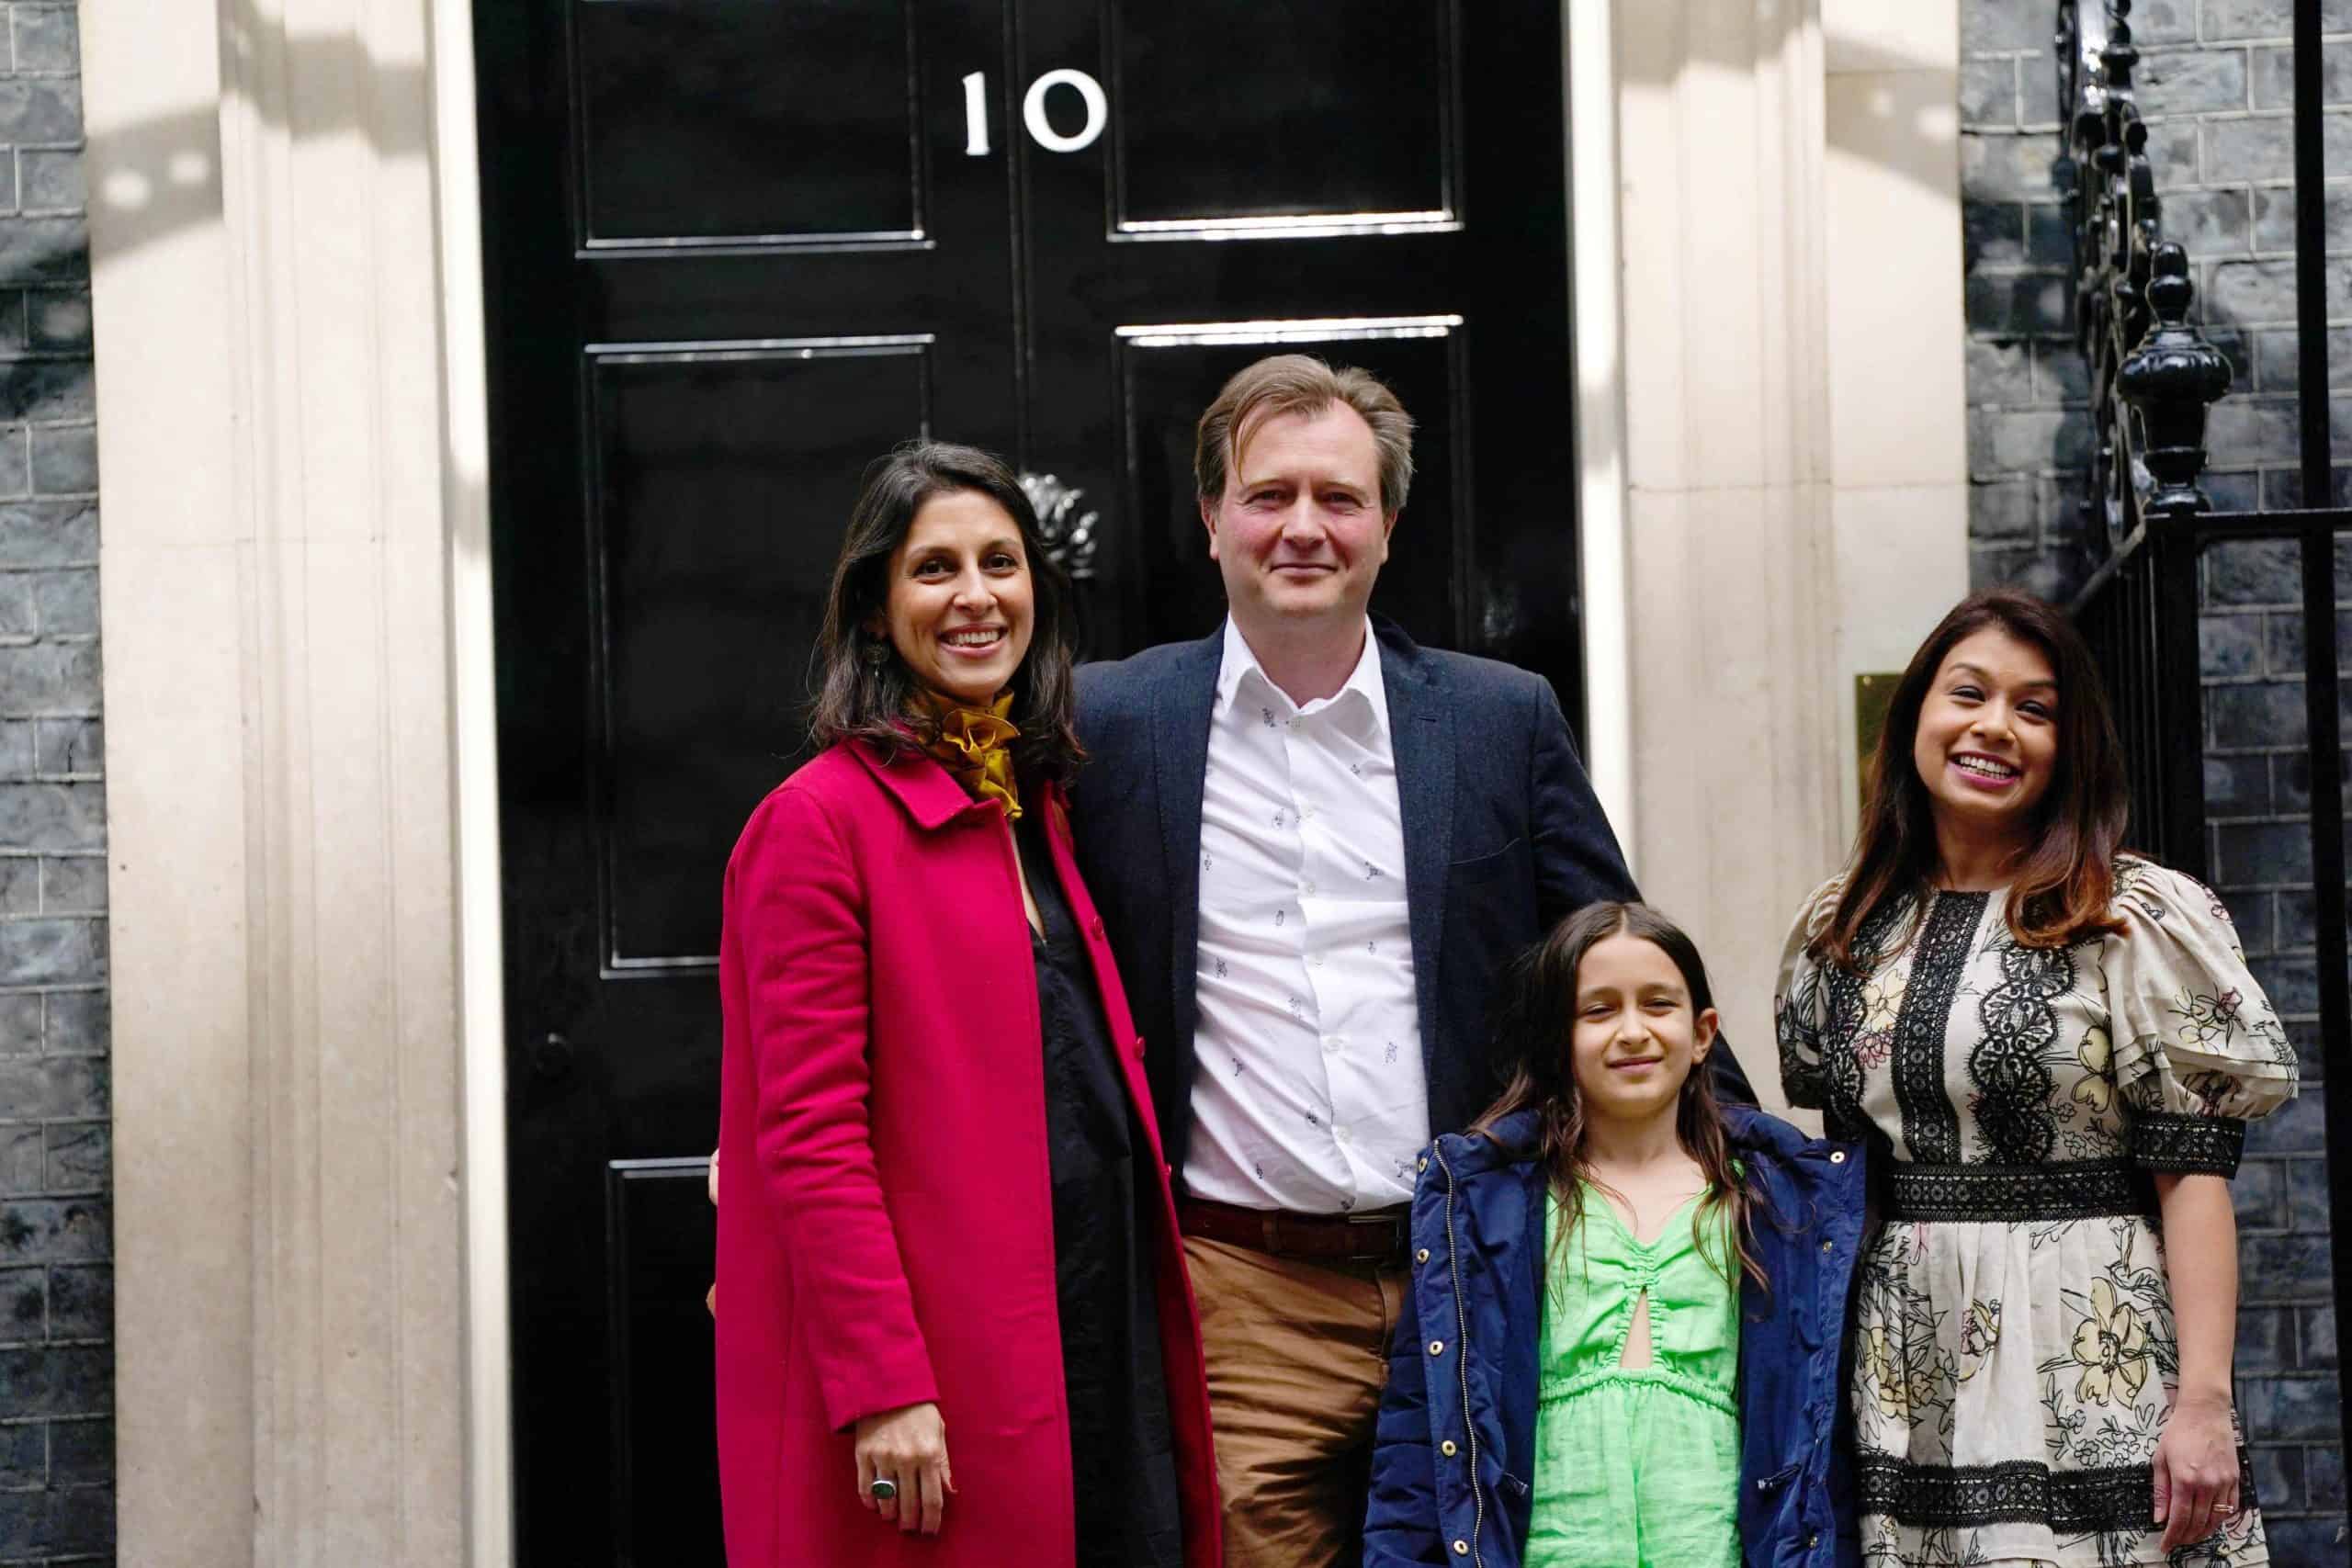 PM does NOT apologise after Nazanin tells him she lived in ‘shadow of his words’